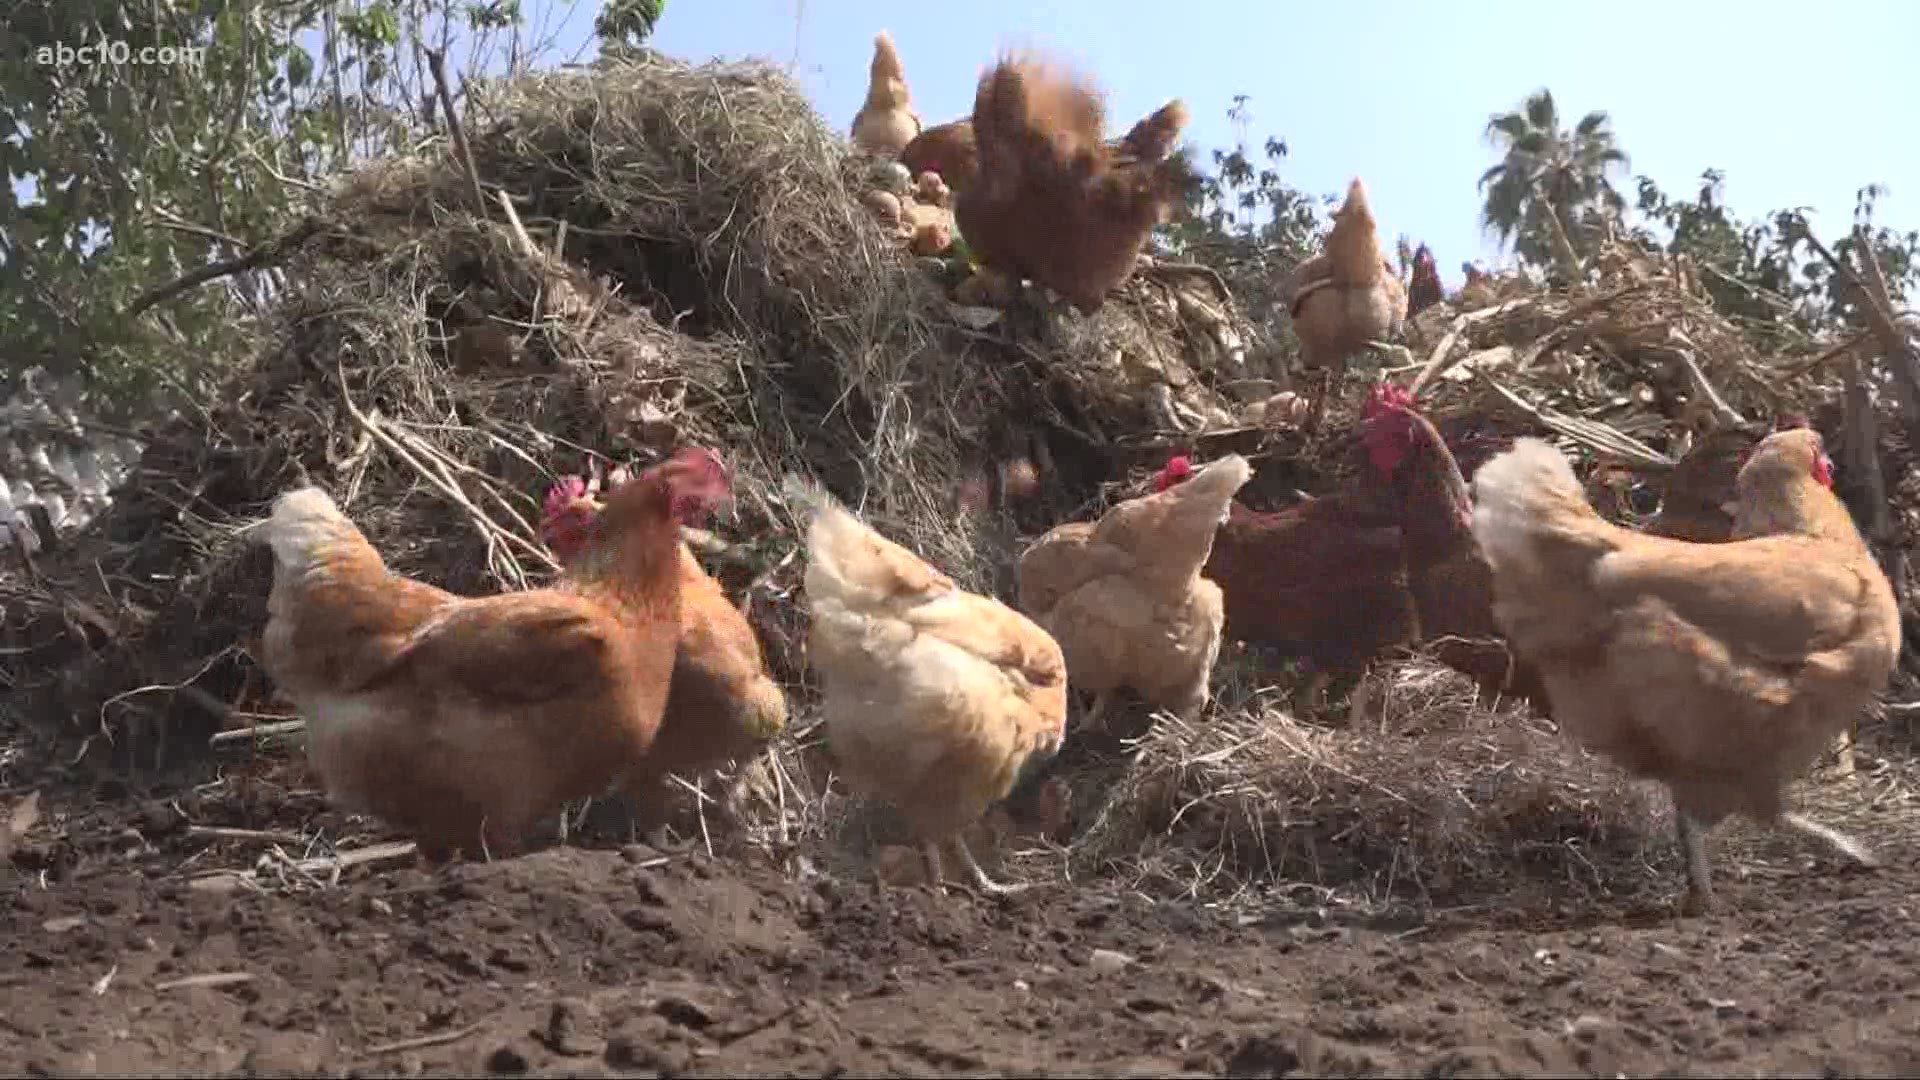 Stockton passed an urban agriculture ordinance to allow more urban farming in the city, making it easier for people to have chickens and other animals in their homes